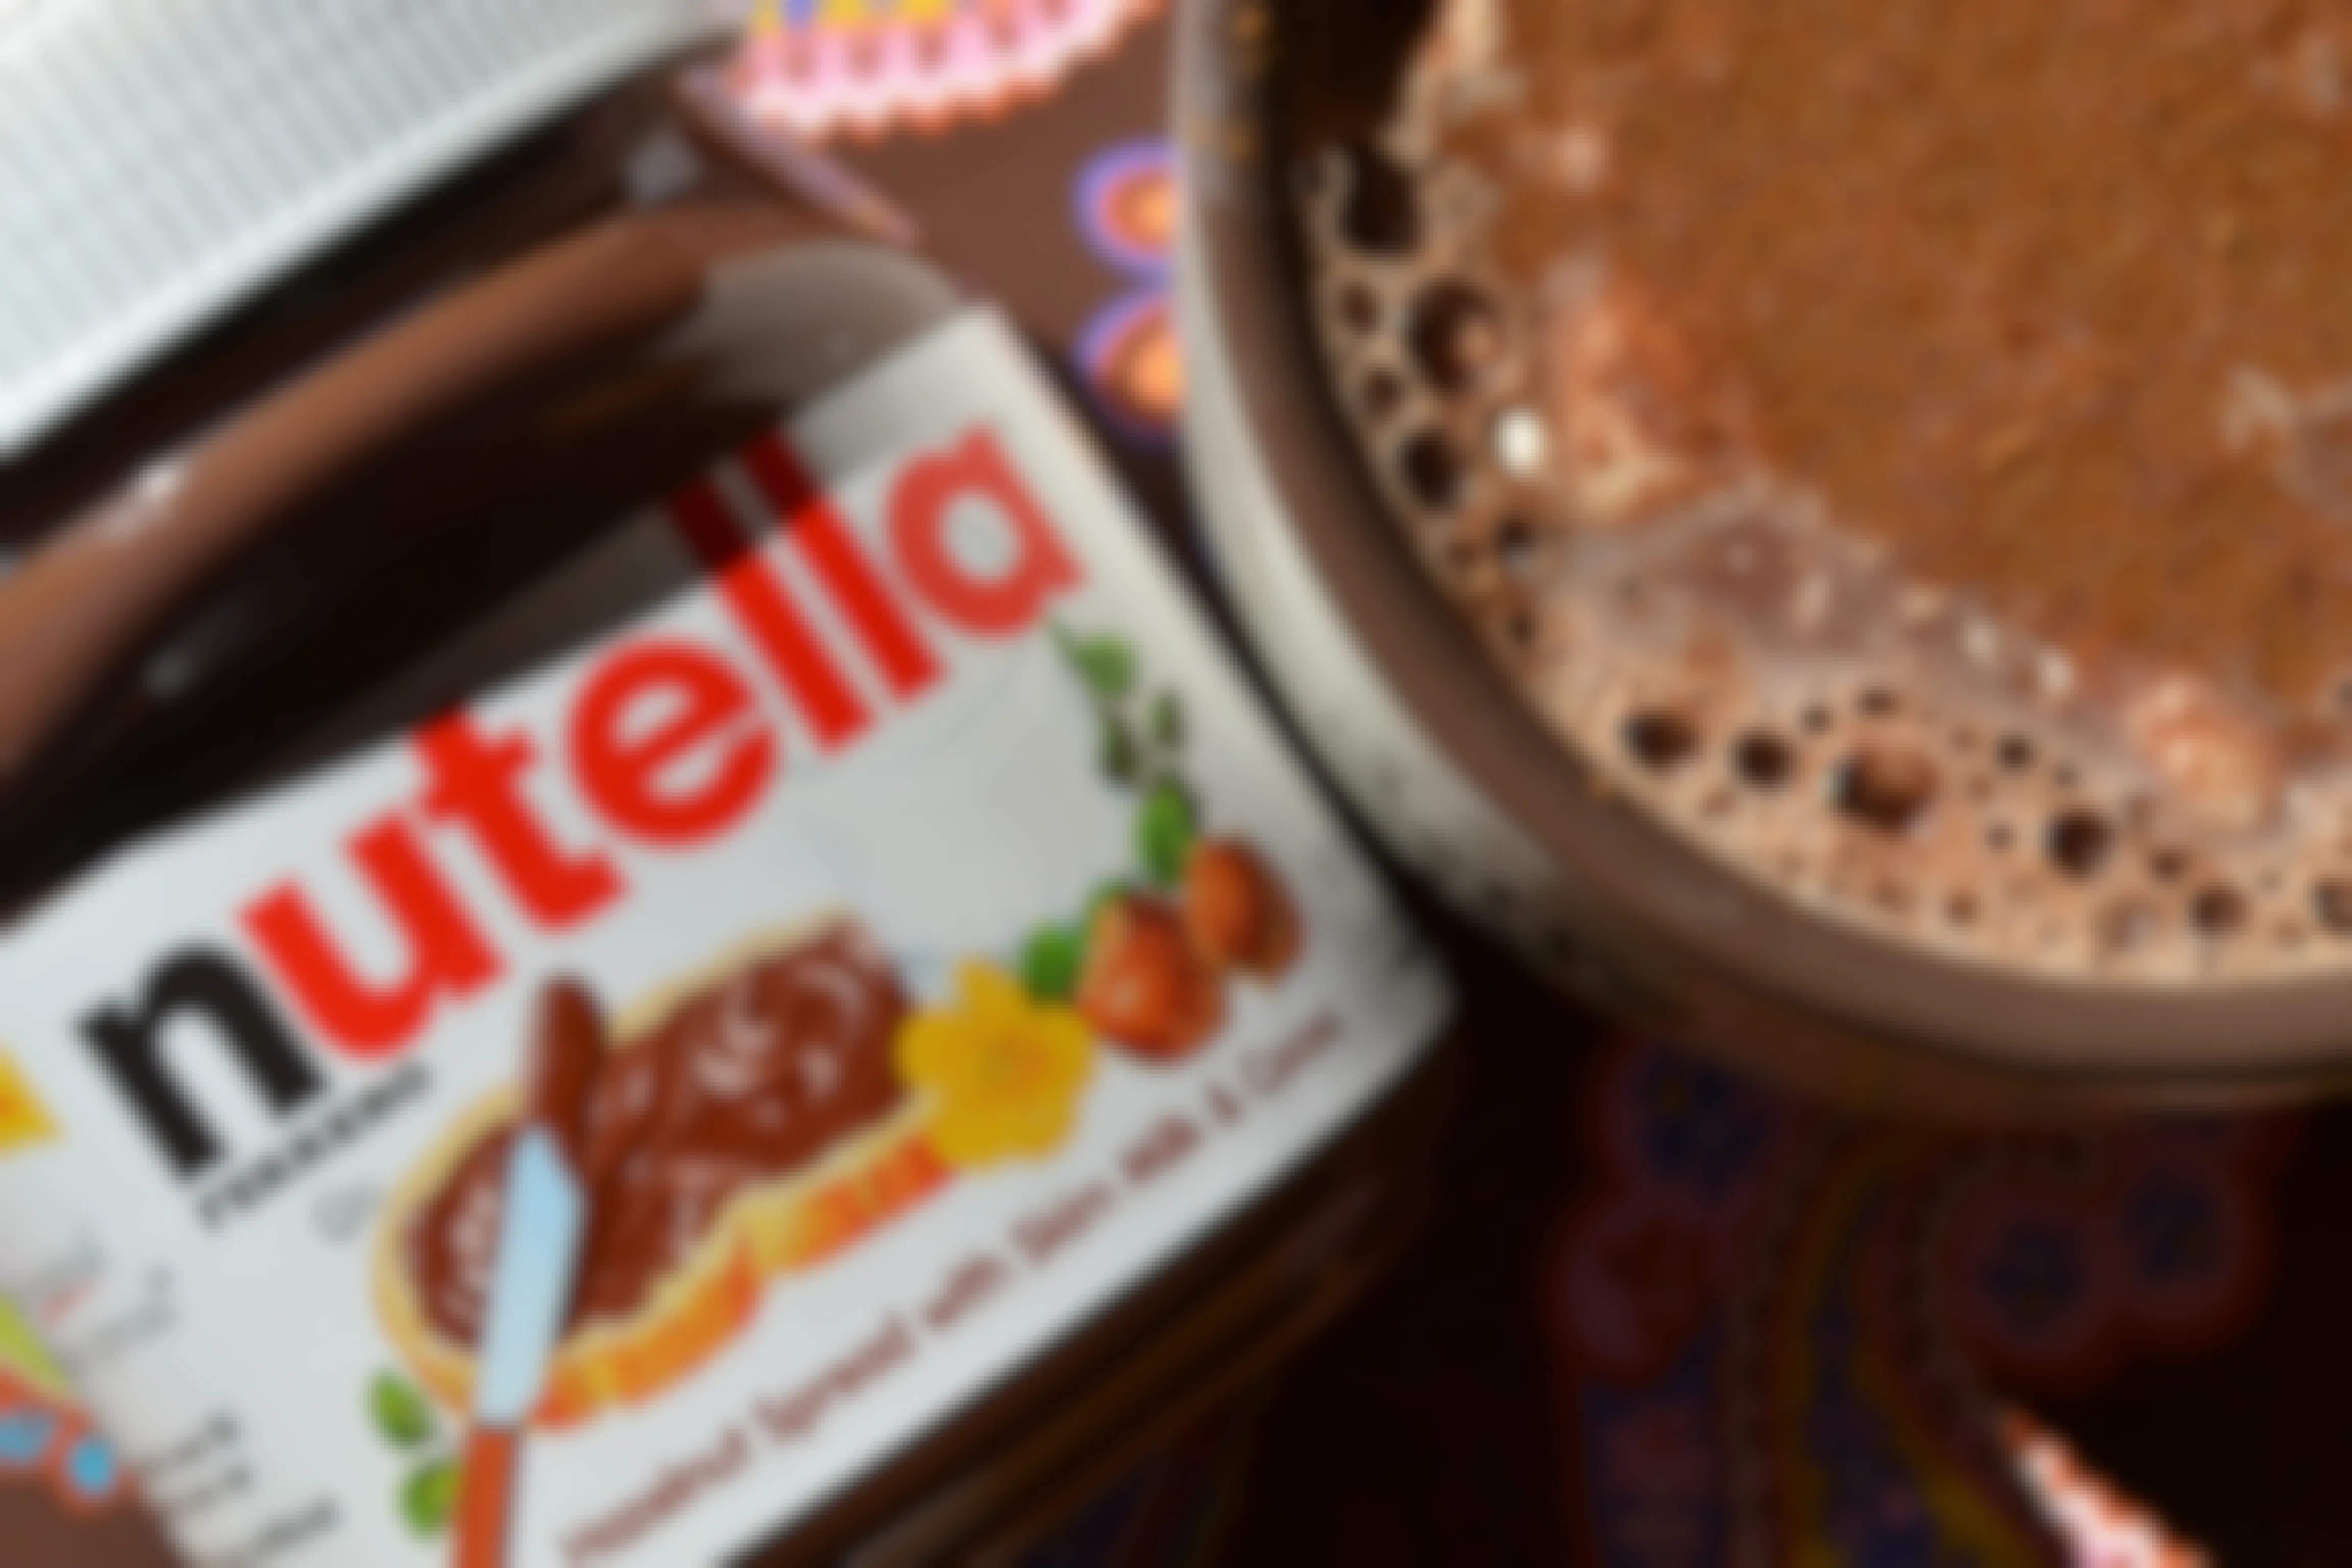 Add a dose of Nutella to your hot chocolate.